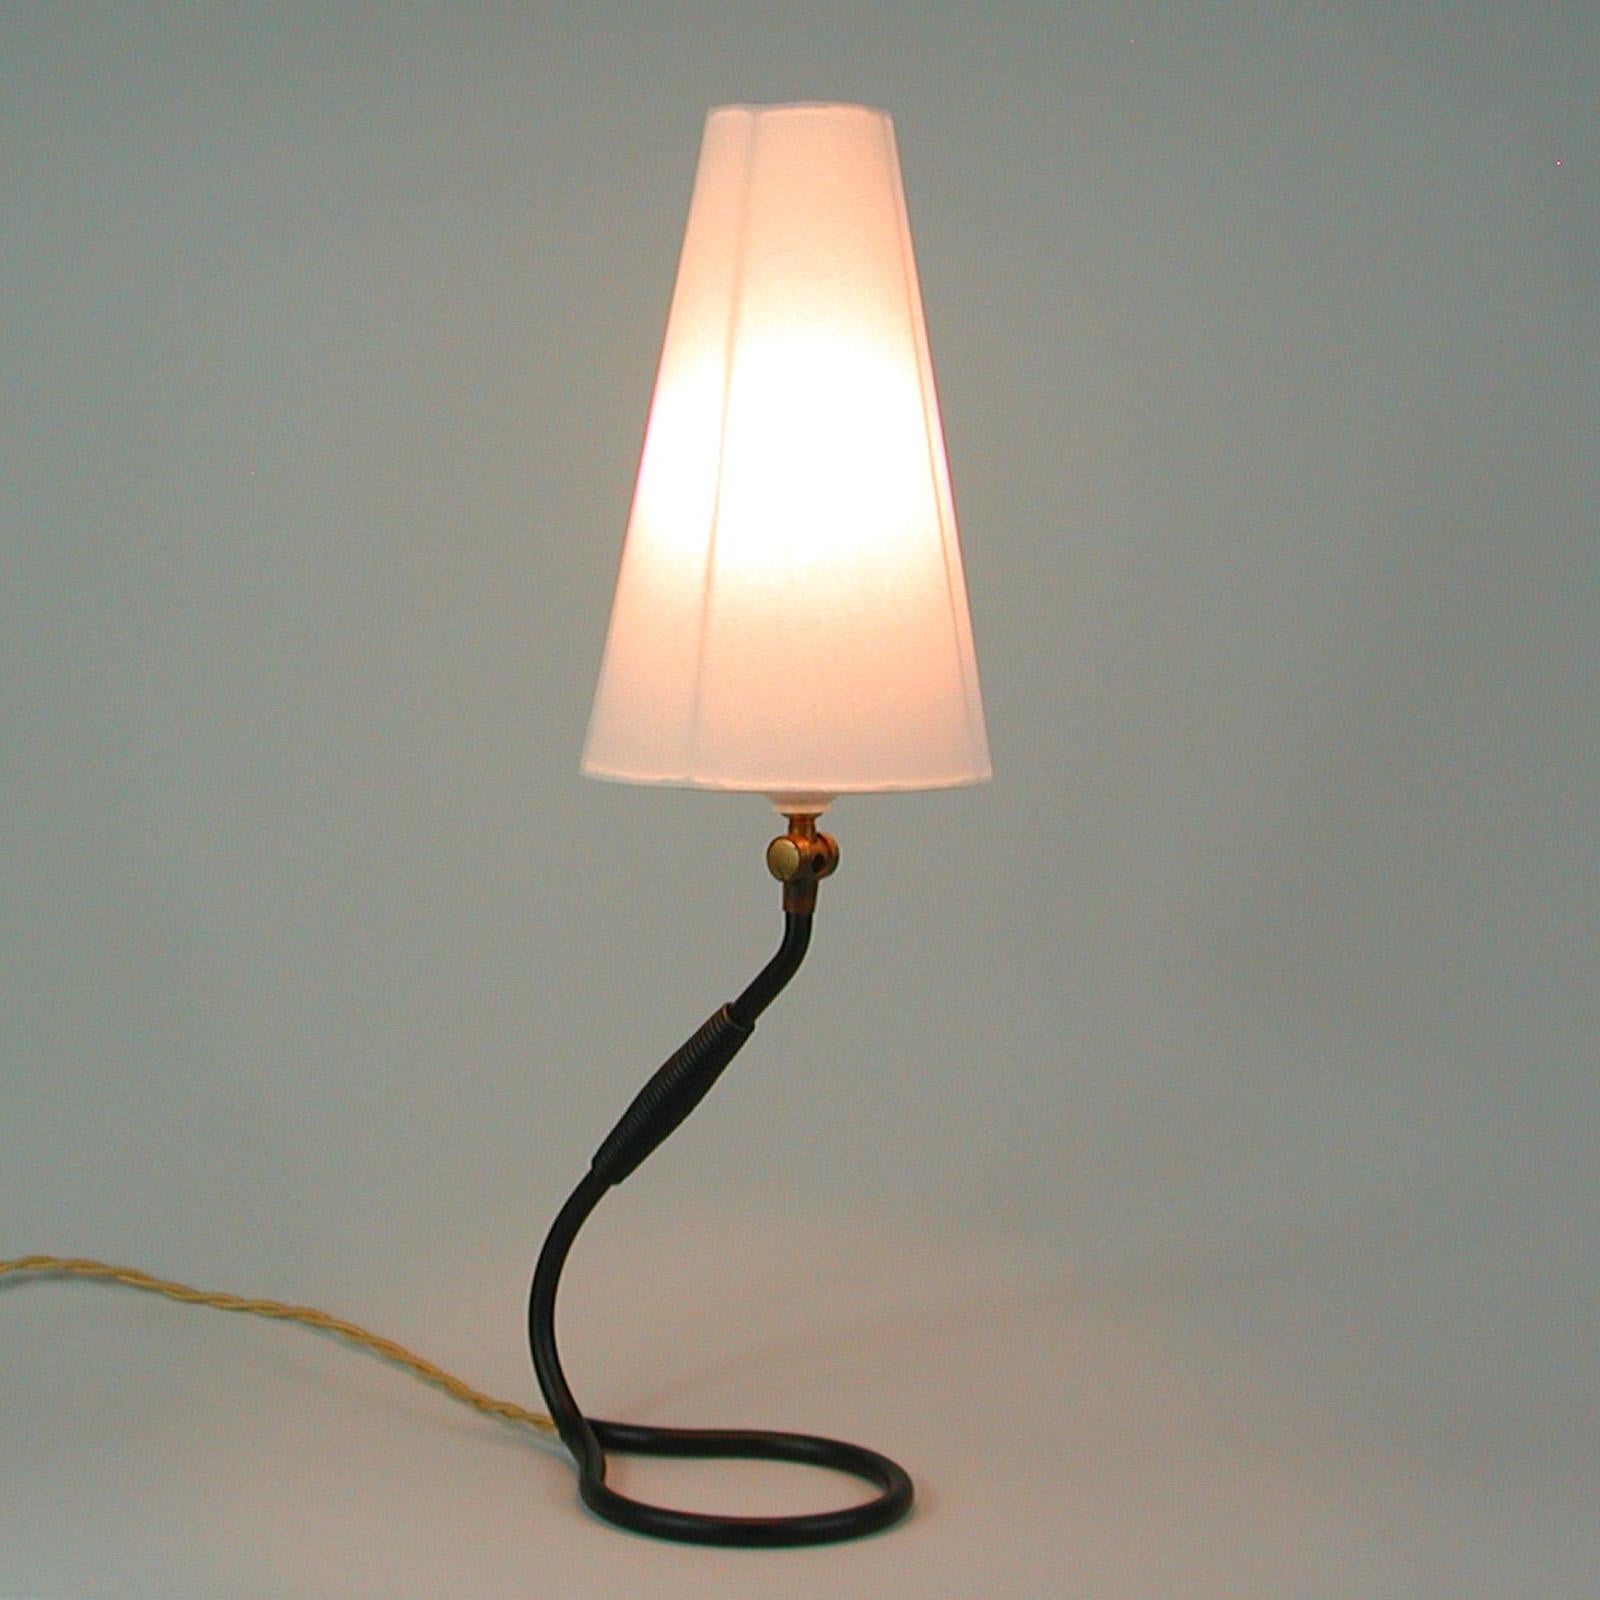 Adjustable Black Brass and Bakelite Wall or Table Lamp 306 by Kaare Klint, 1950s For Sale 6